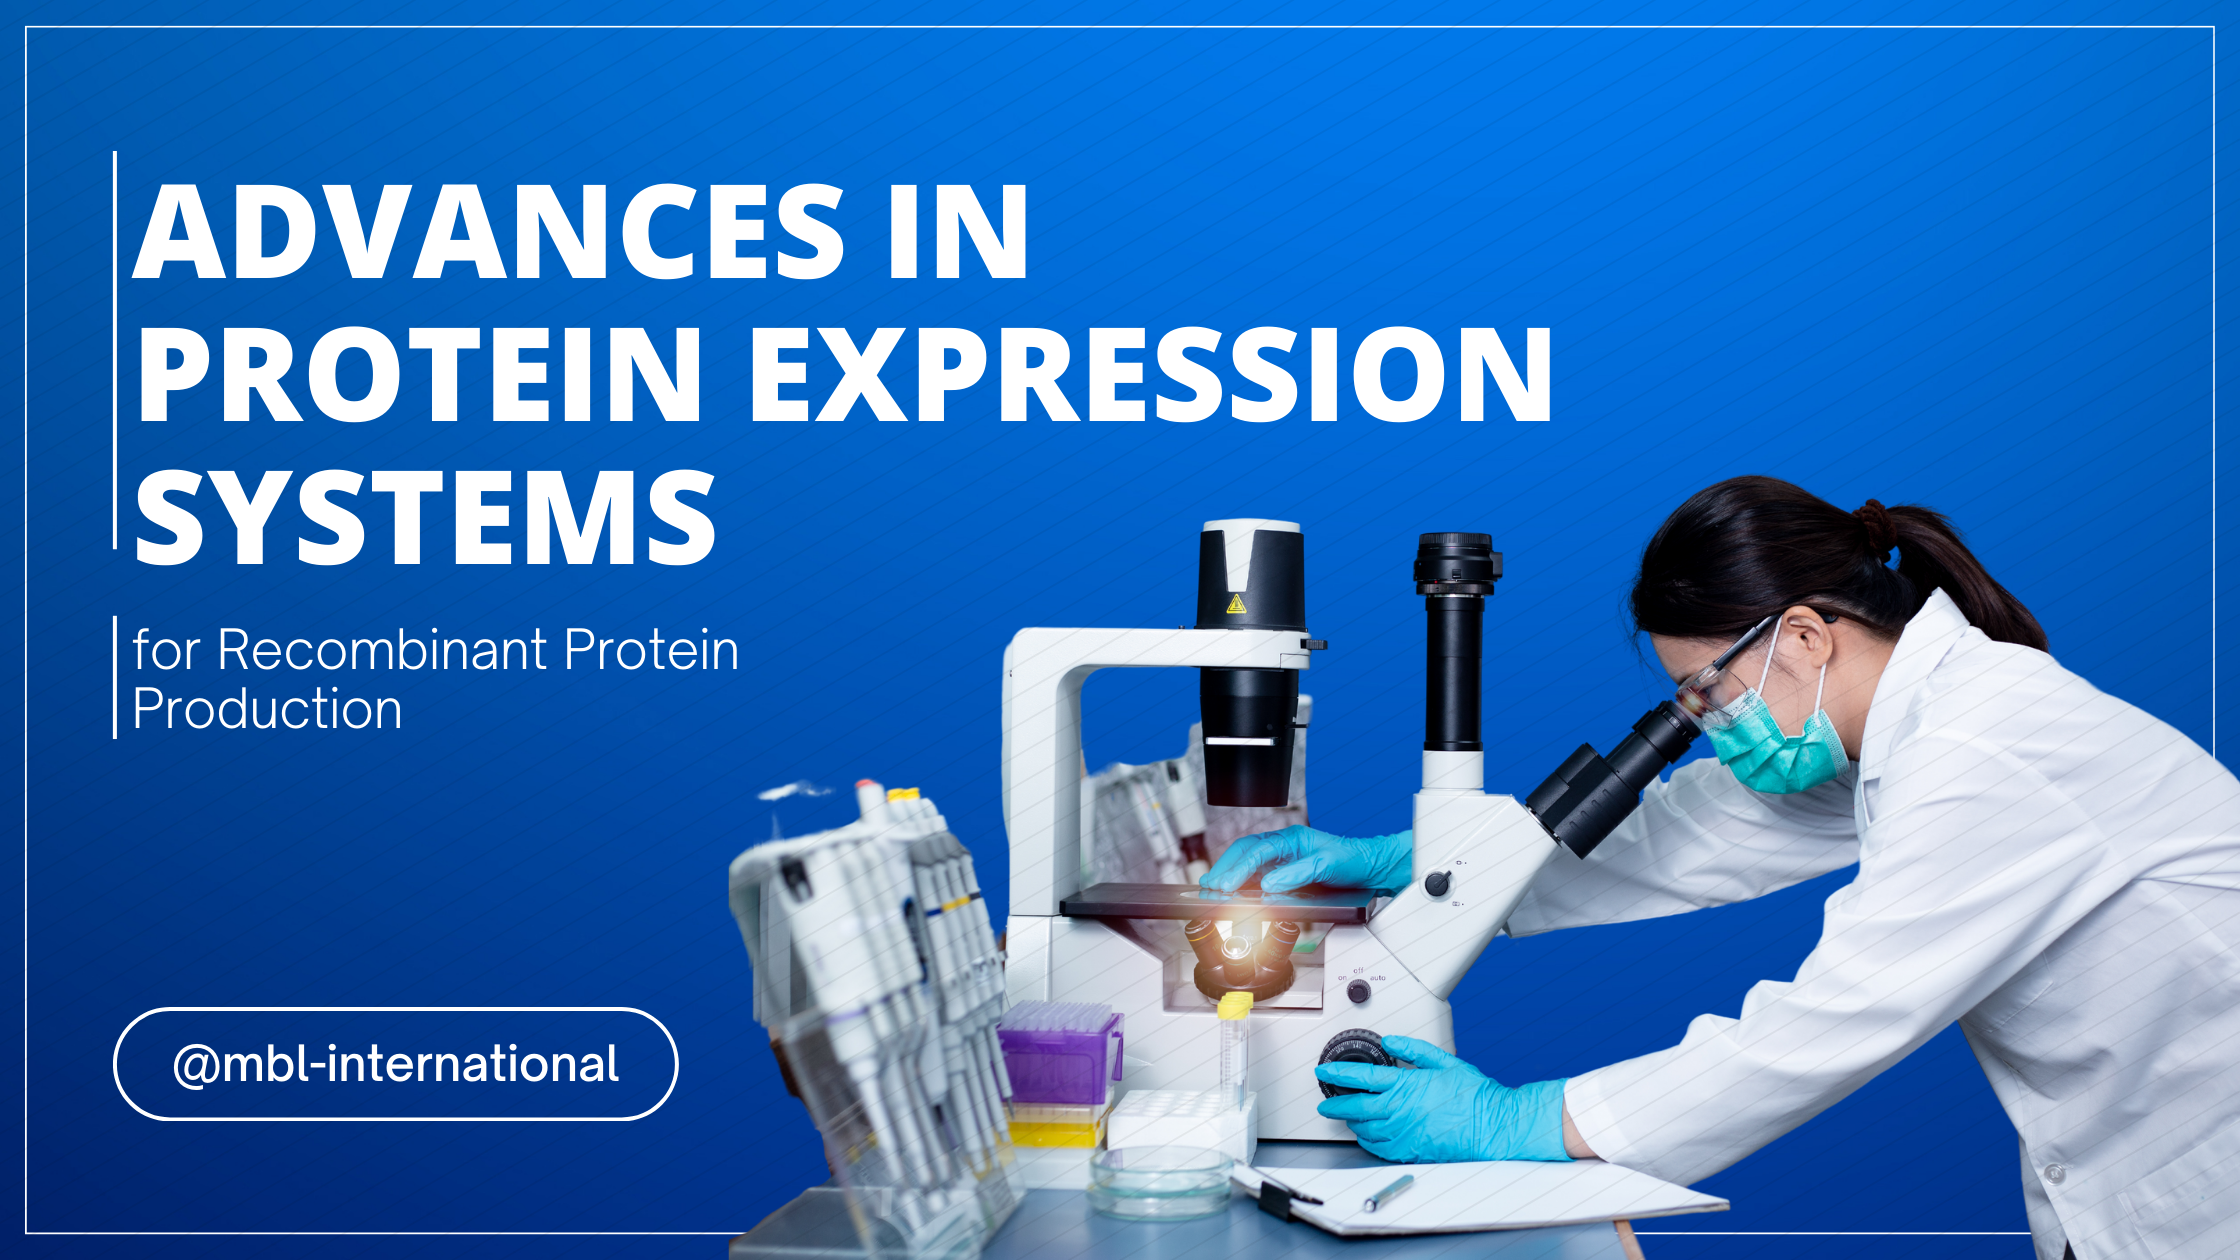 Advances in Protein Expression Systems for Recombinant Protein Production